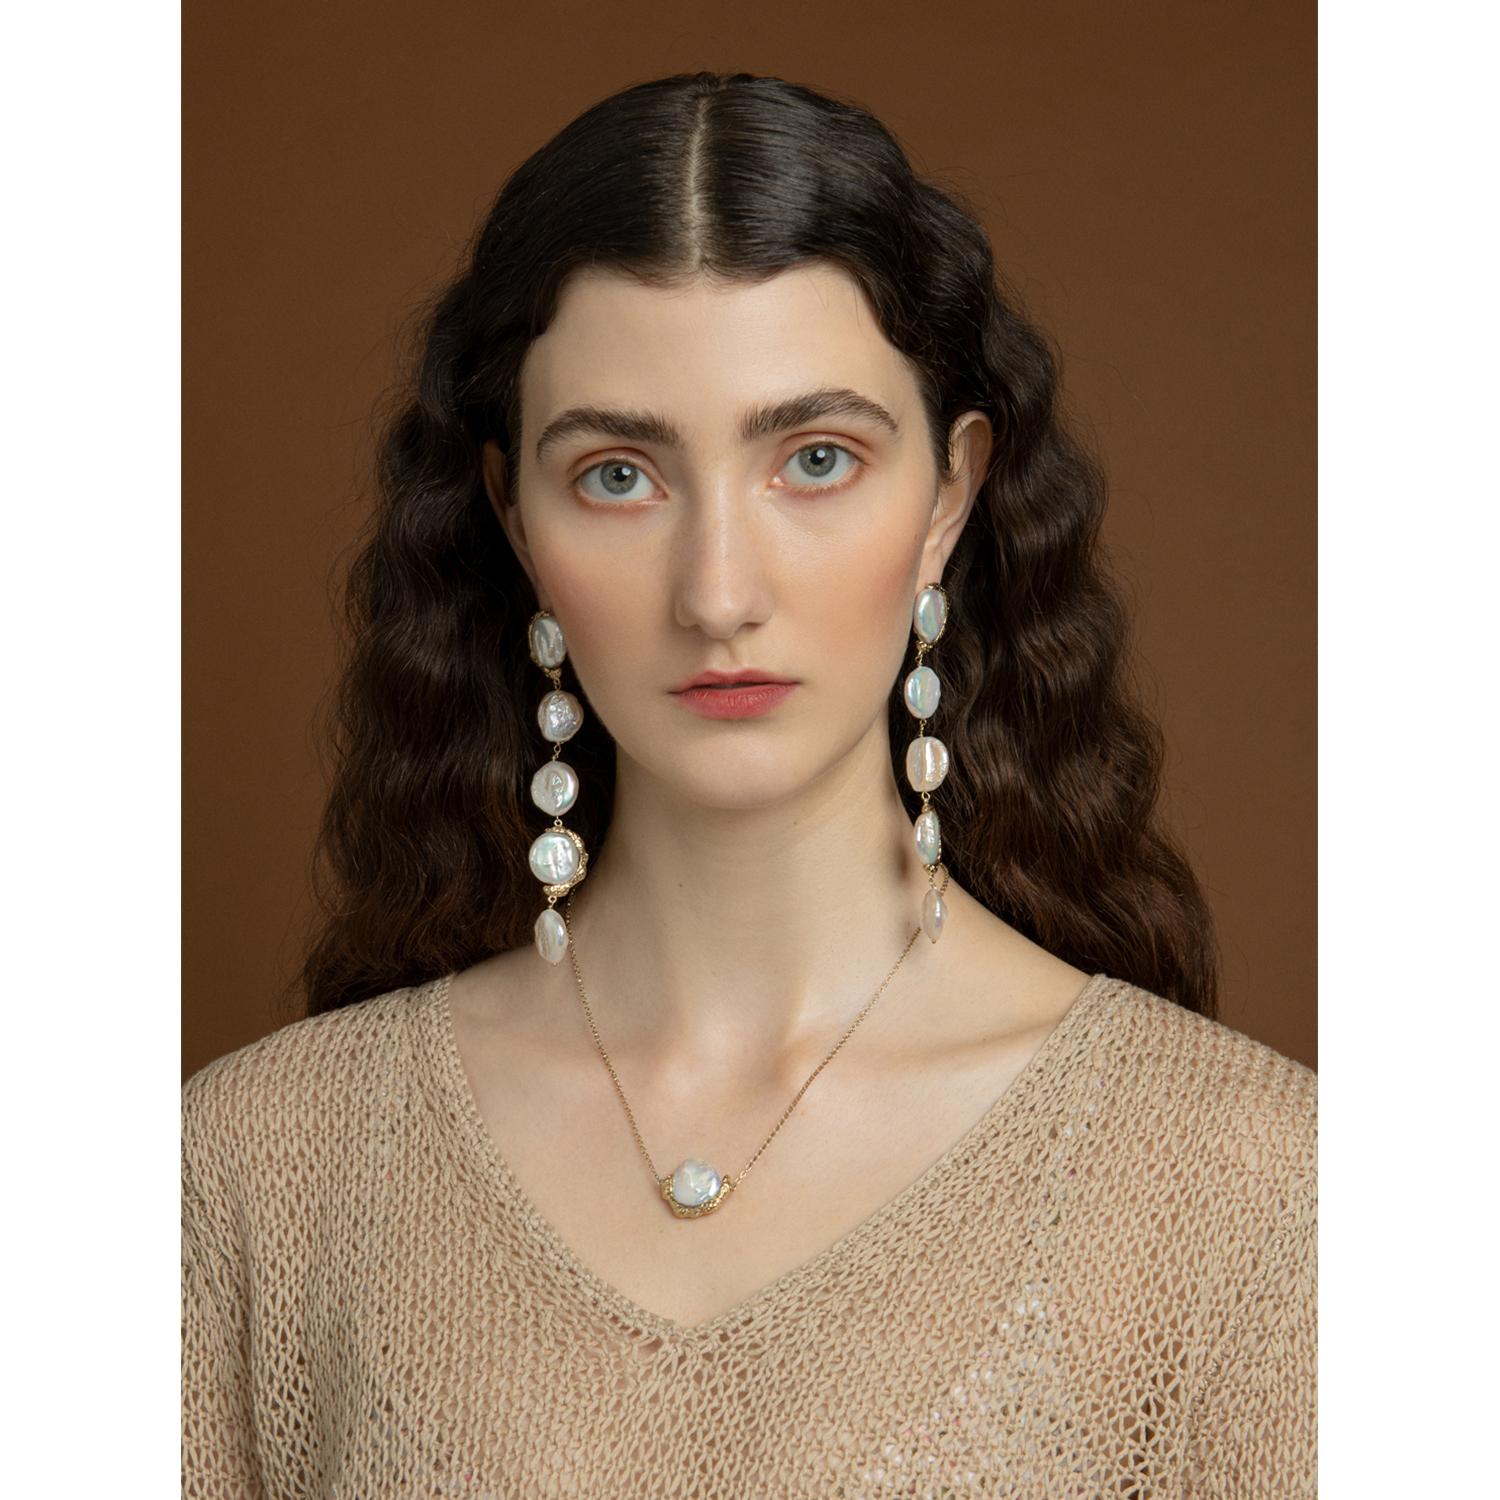 Enamored with Keshi Pearls because of their absolute uniqueness, designer of Vintouch Alessandro Ricevuto has taken inspiration from the Latin quote 'Per Aspera Ad Astra' to create this post-lockdown collection. Handmade in the brand's own workshops